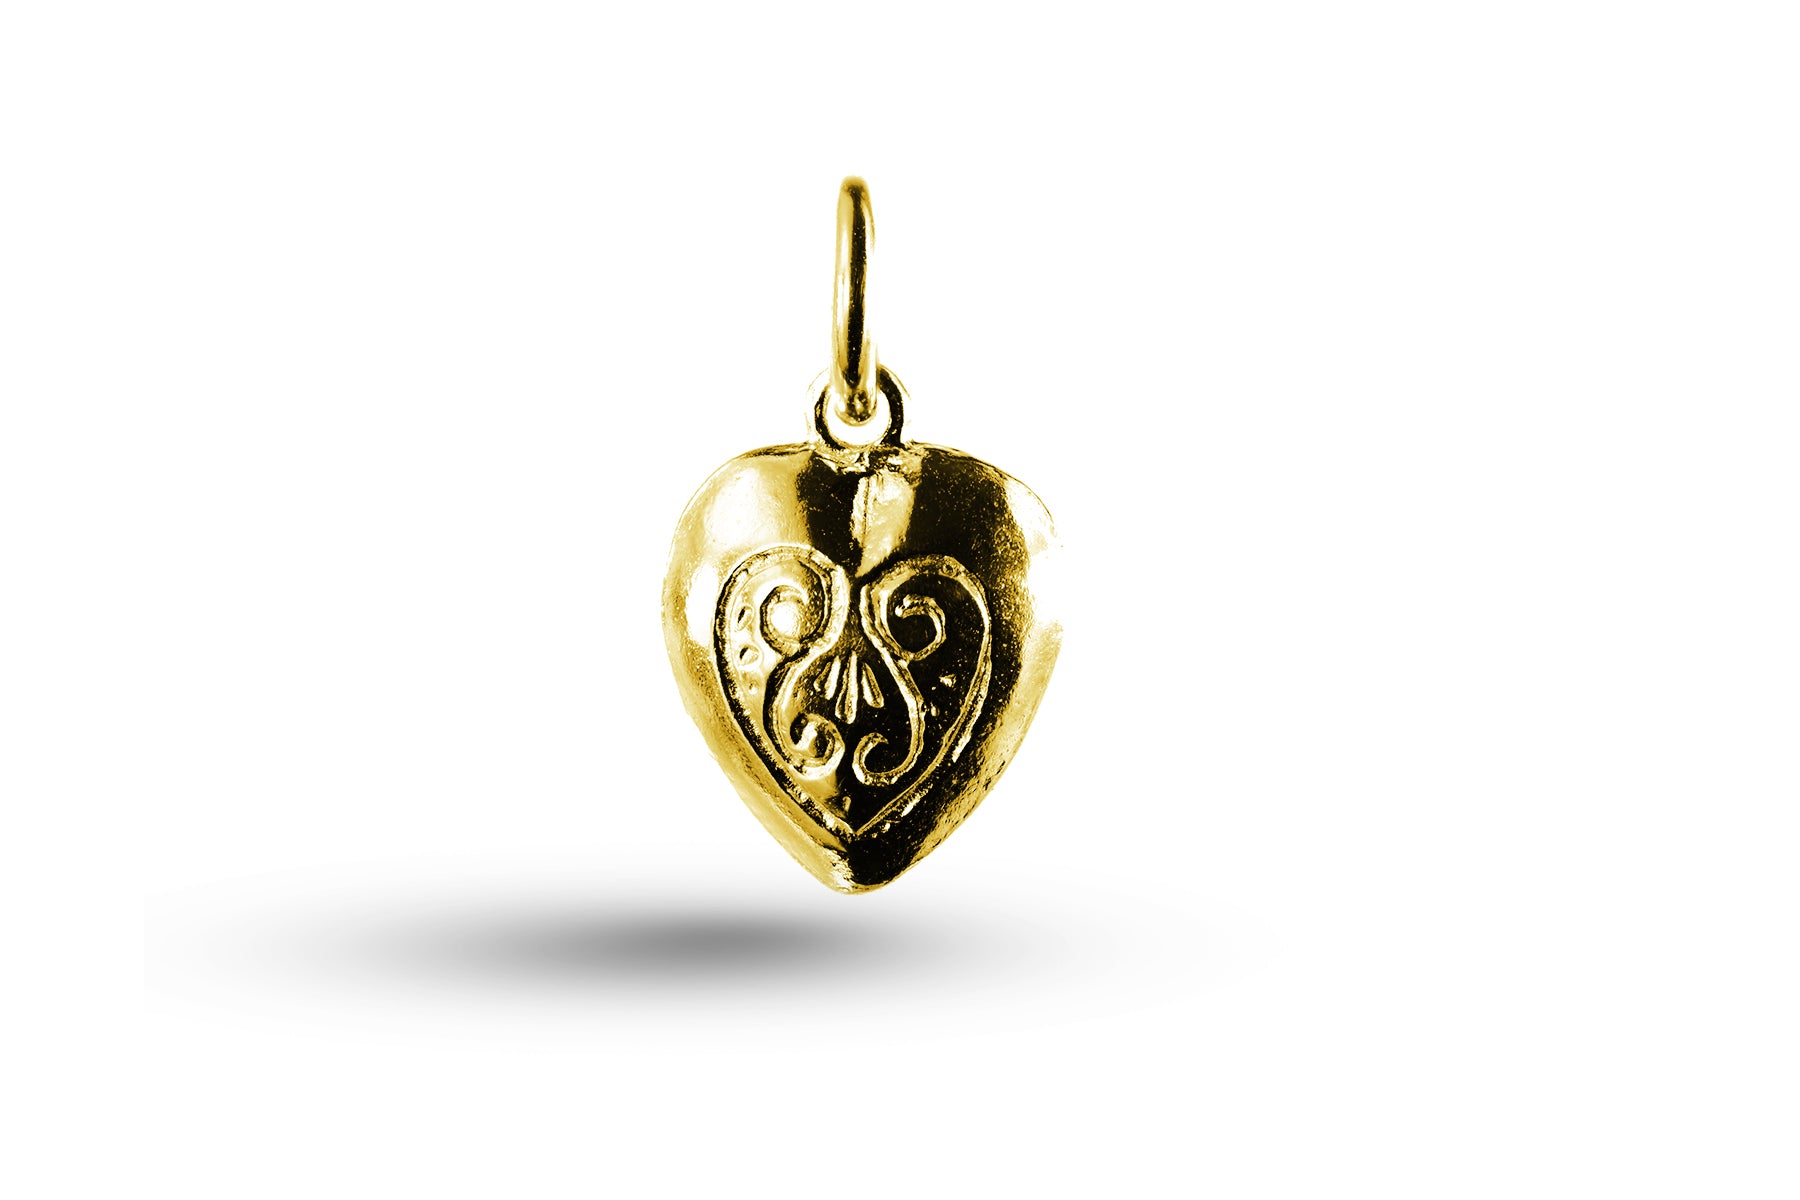 Yellow gold Patterned Heart charm.